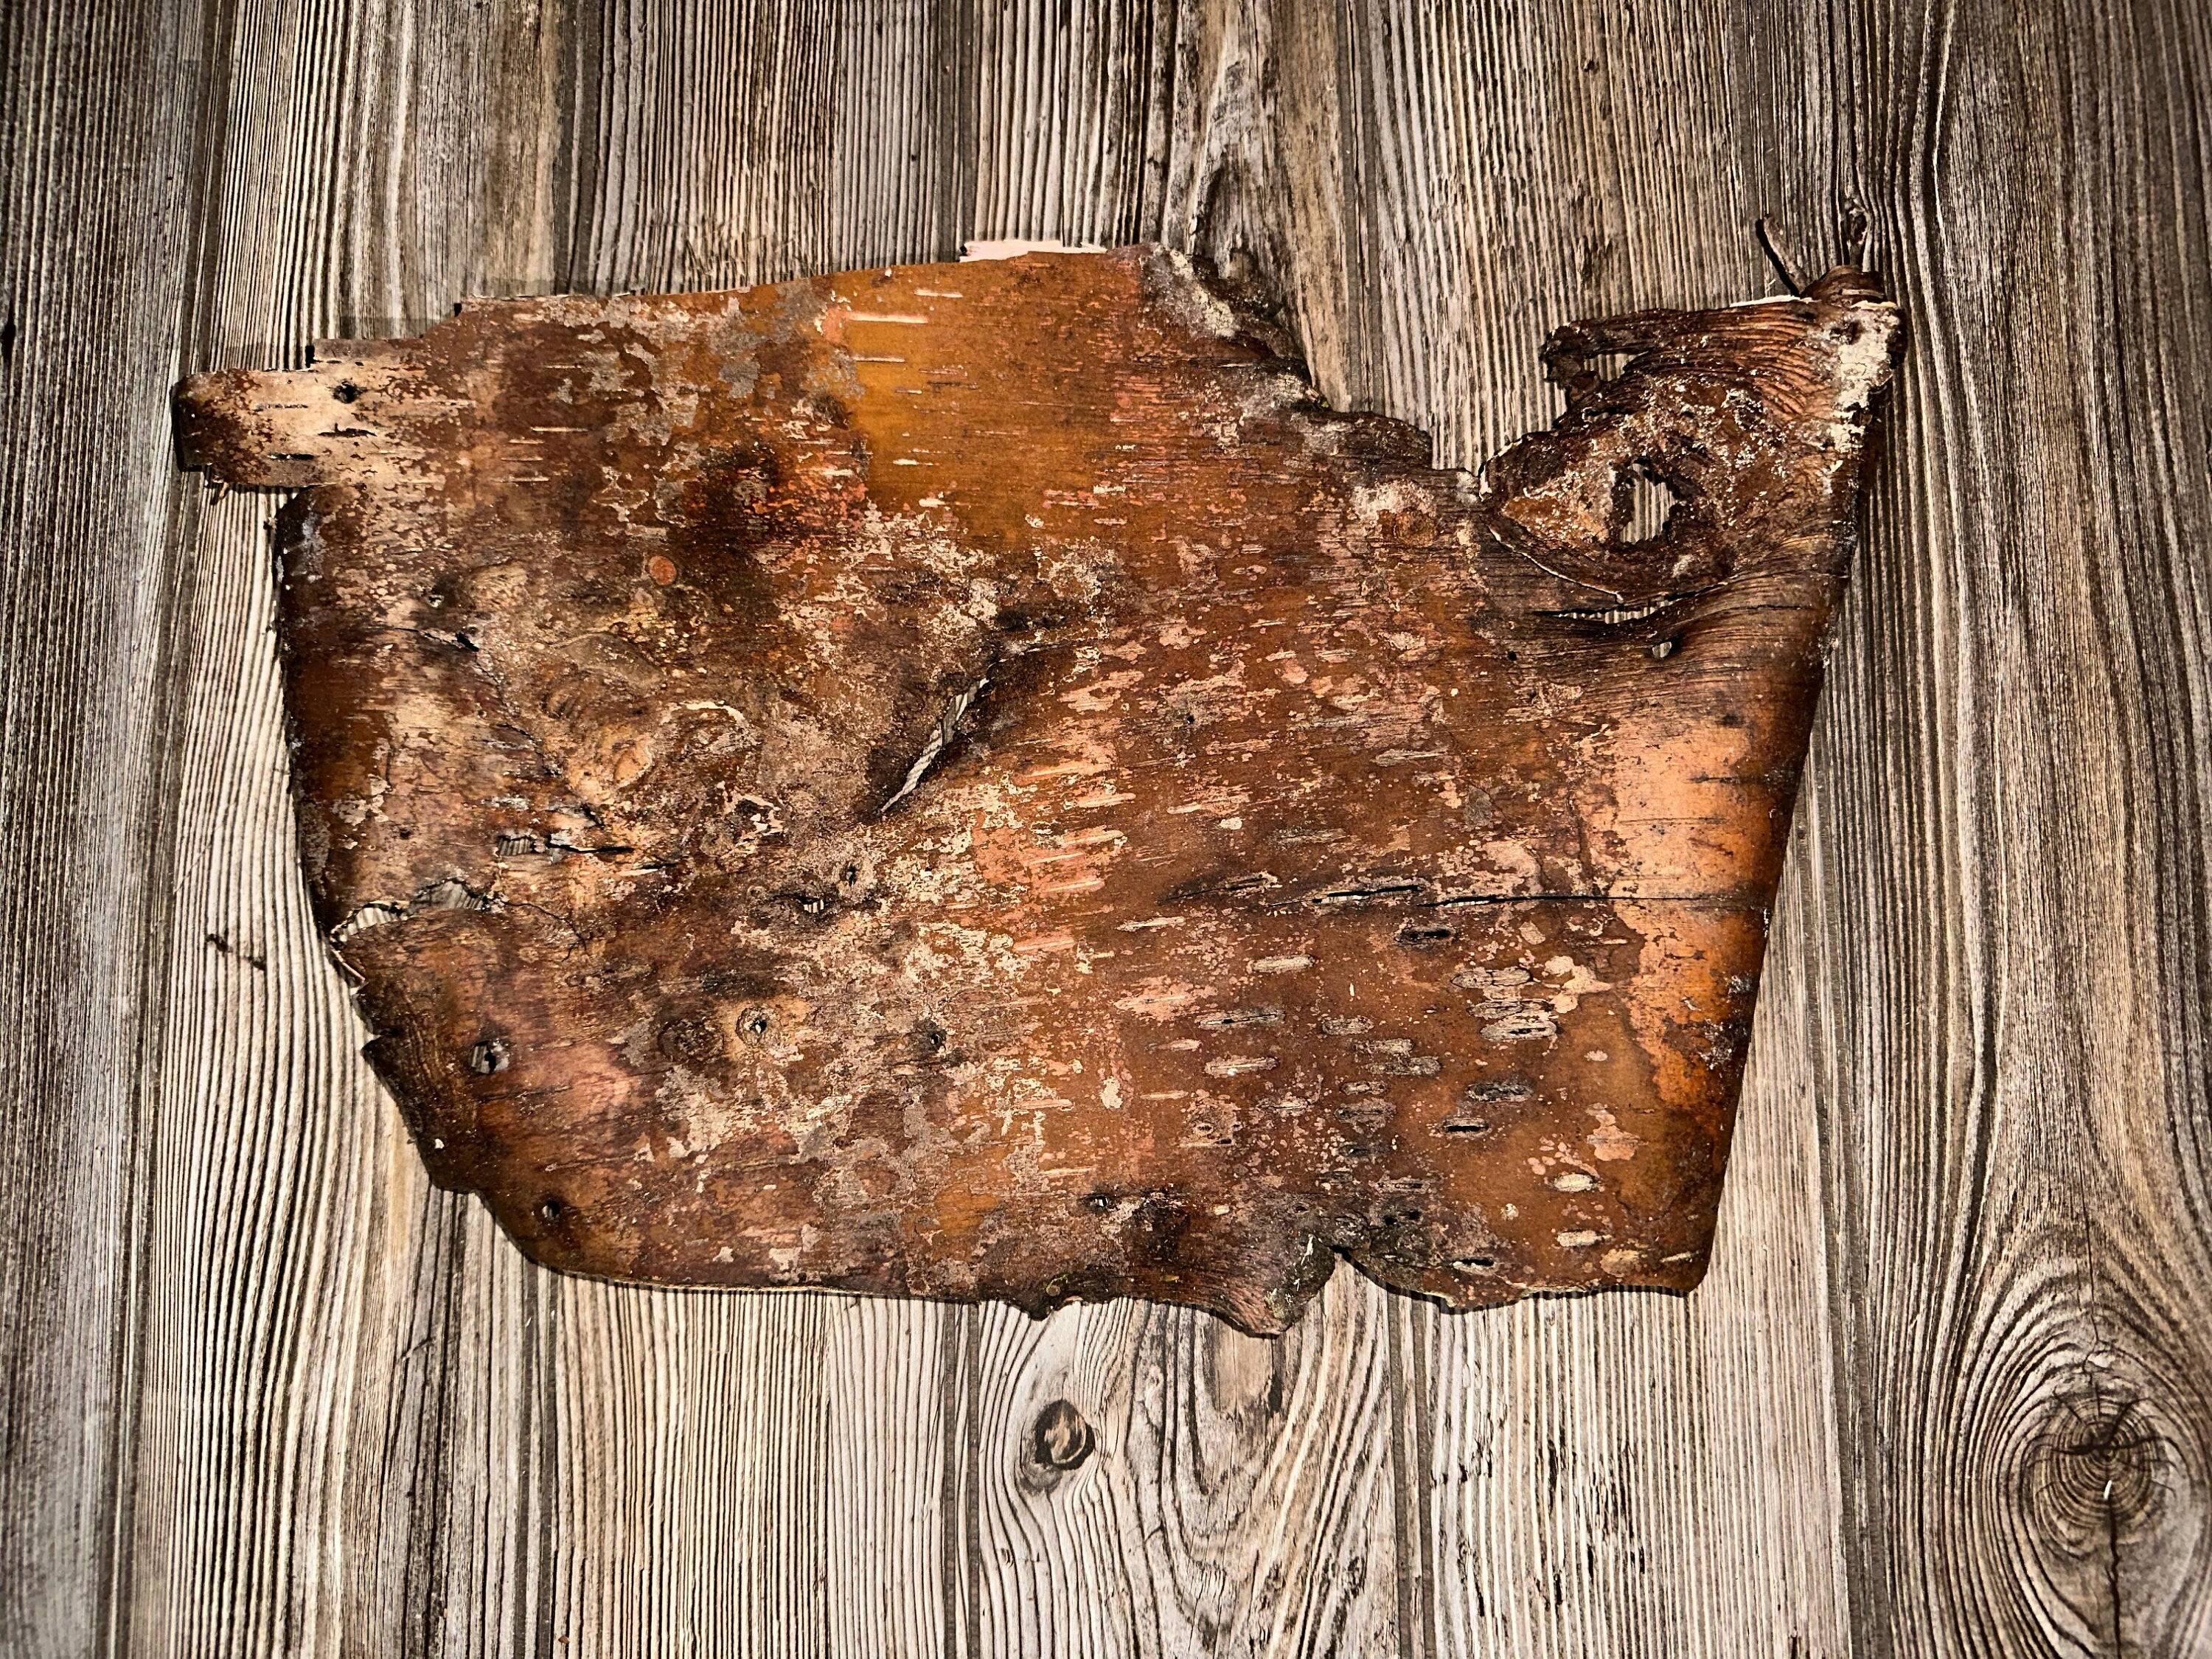 White Birch Bark, Paper Birch, Approximately 16 Inches Long by 10 Inches Wide